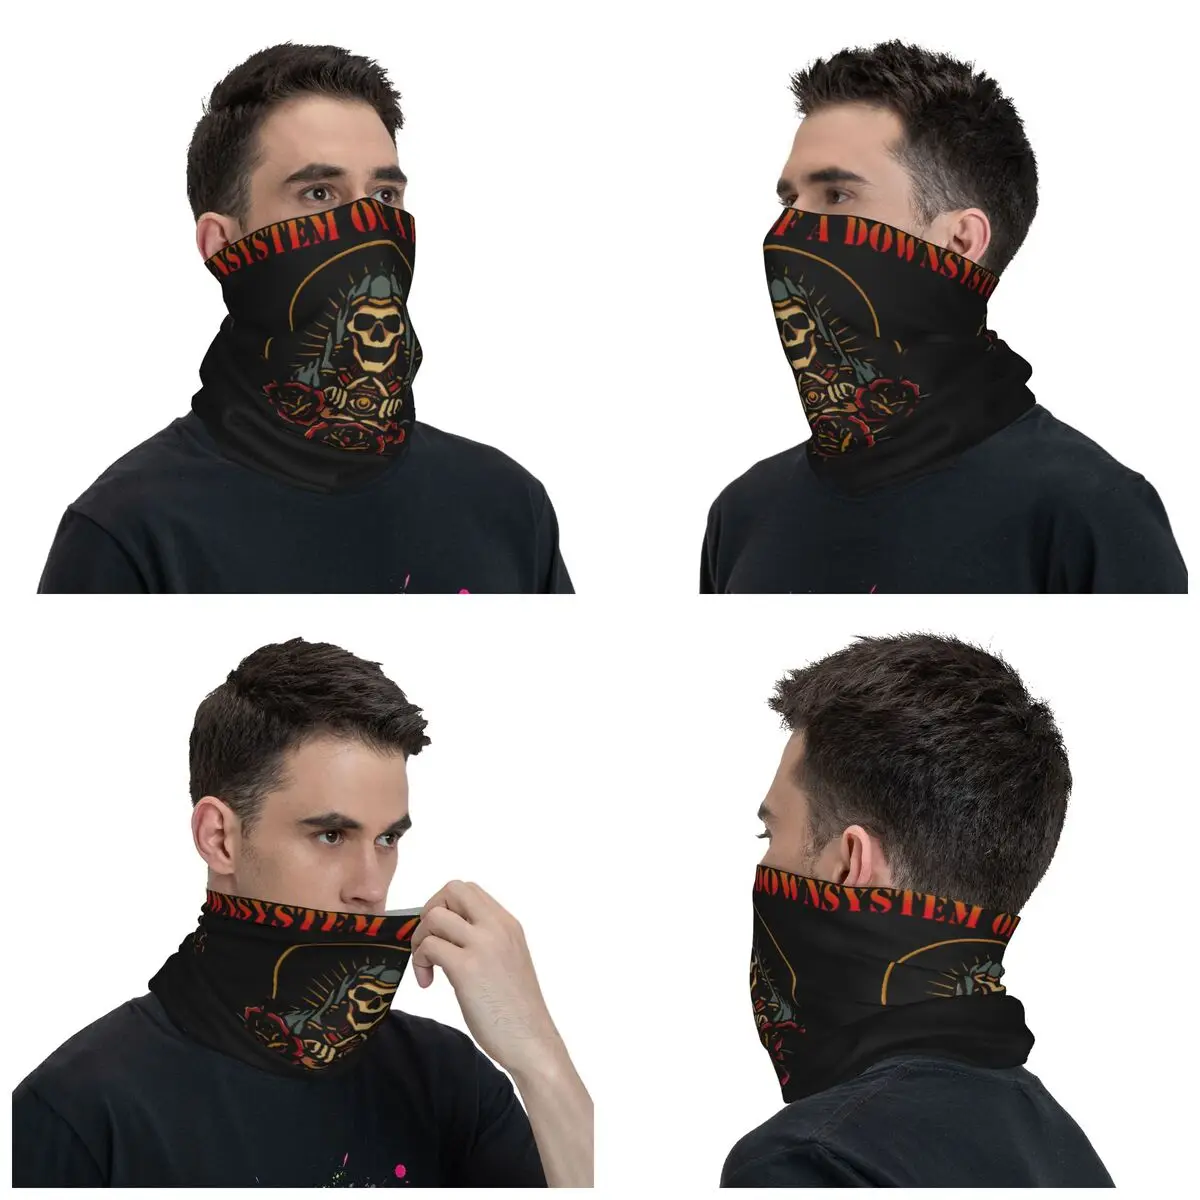 Skull SOAD Heavy Metal Wrap Scarf Accessories Neck Cover System Of A Down Band Bandana Riding Headwear for Men Women All Season